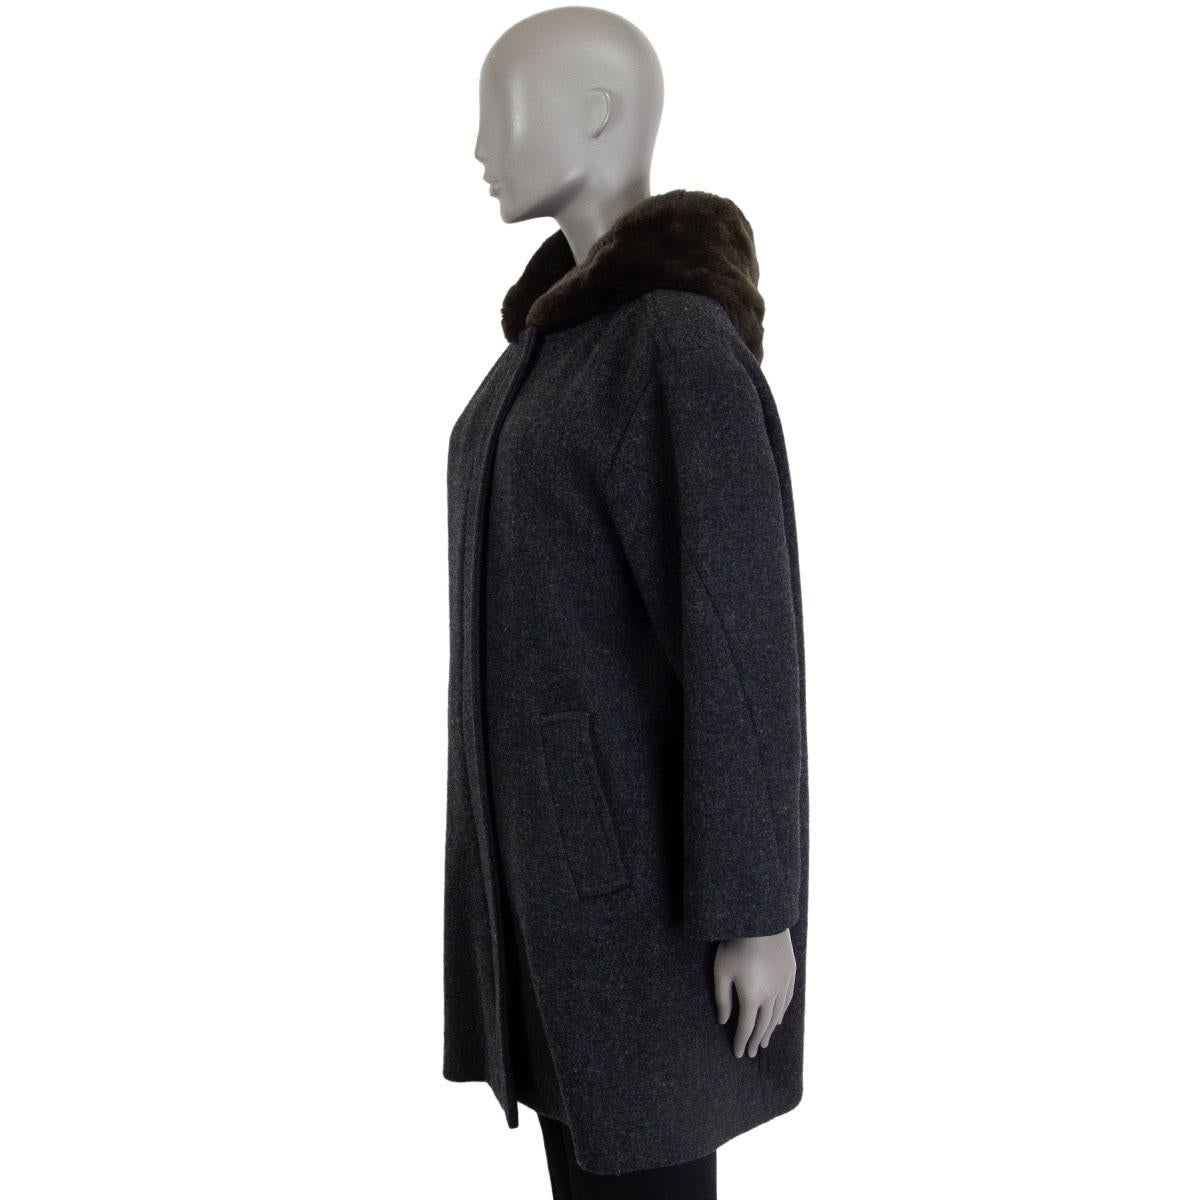 Marni fur hooded coat in dark grey wool (75%), rabbit rex fur (20%) and nylon (5%) with slit pockets. Closes on the front with a zipper and snap buttons. Lined in cotton (60%) and viscose (40%). Has been worn and is in excellent condition.

Tag Size